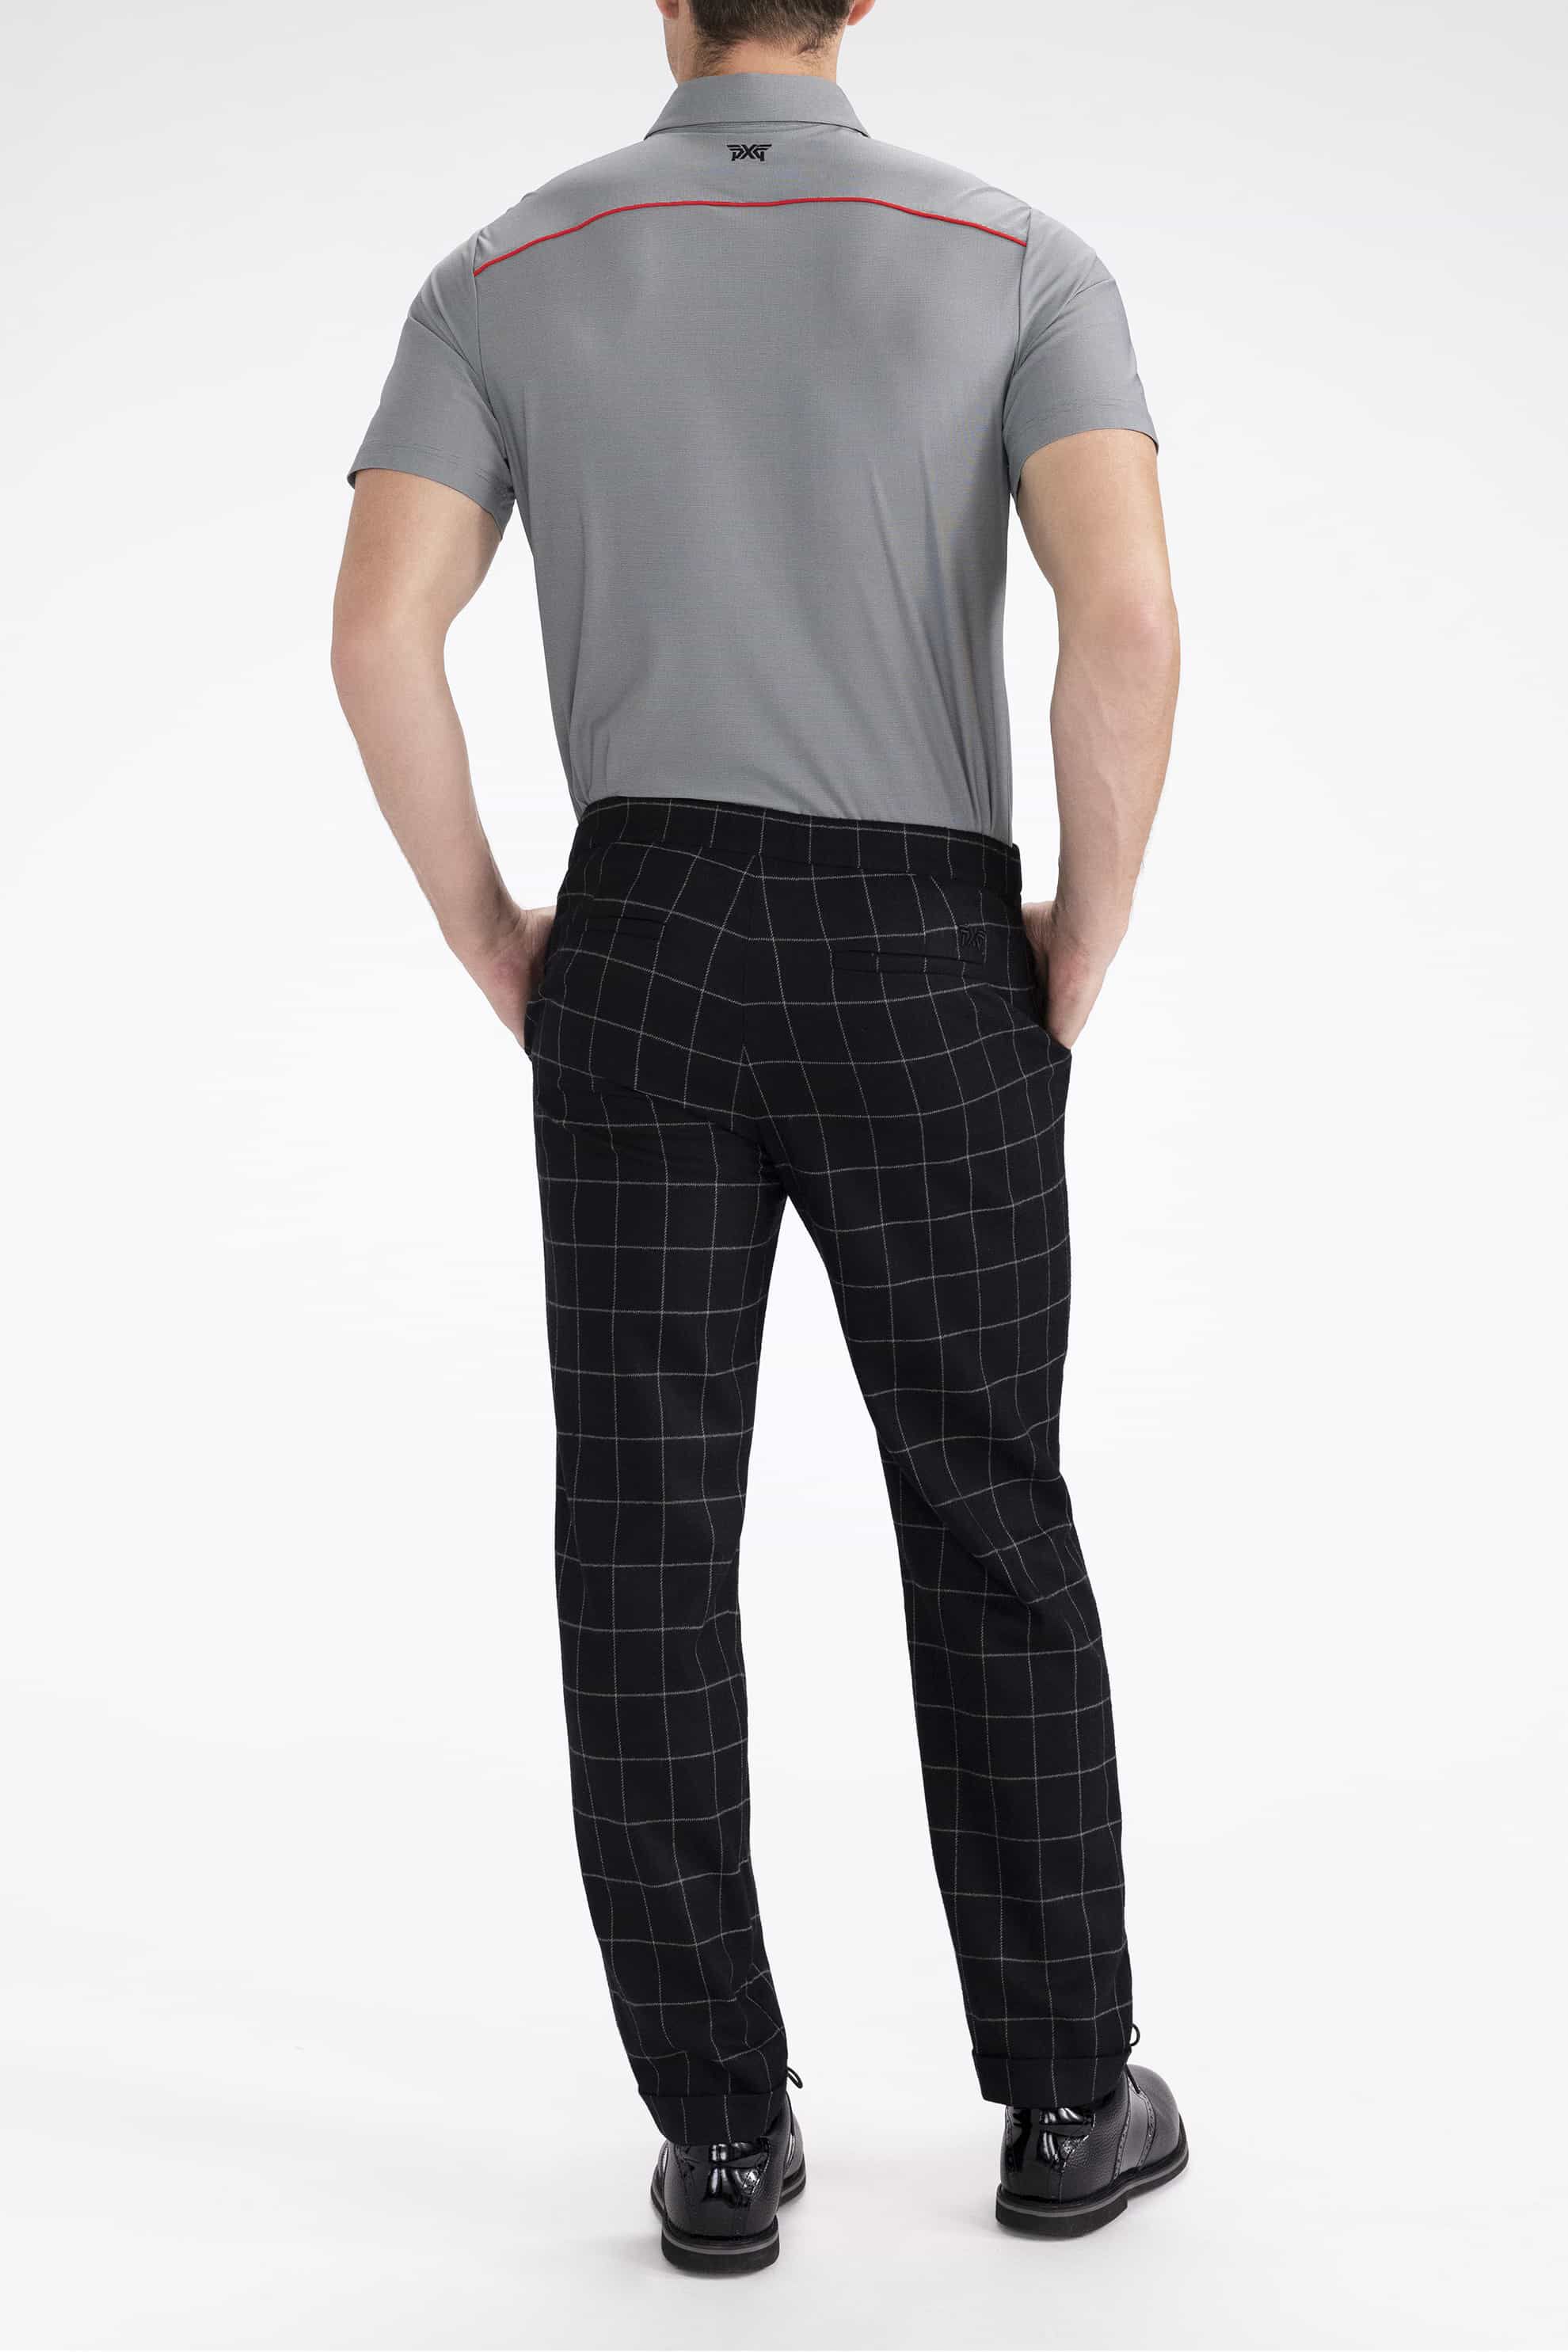 Windowpane Cuffed Pants  Shop the Highest Quality Golf Apparel Gear  Accessories and Golf Clubs at PXG